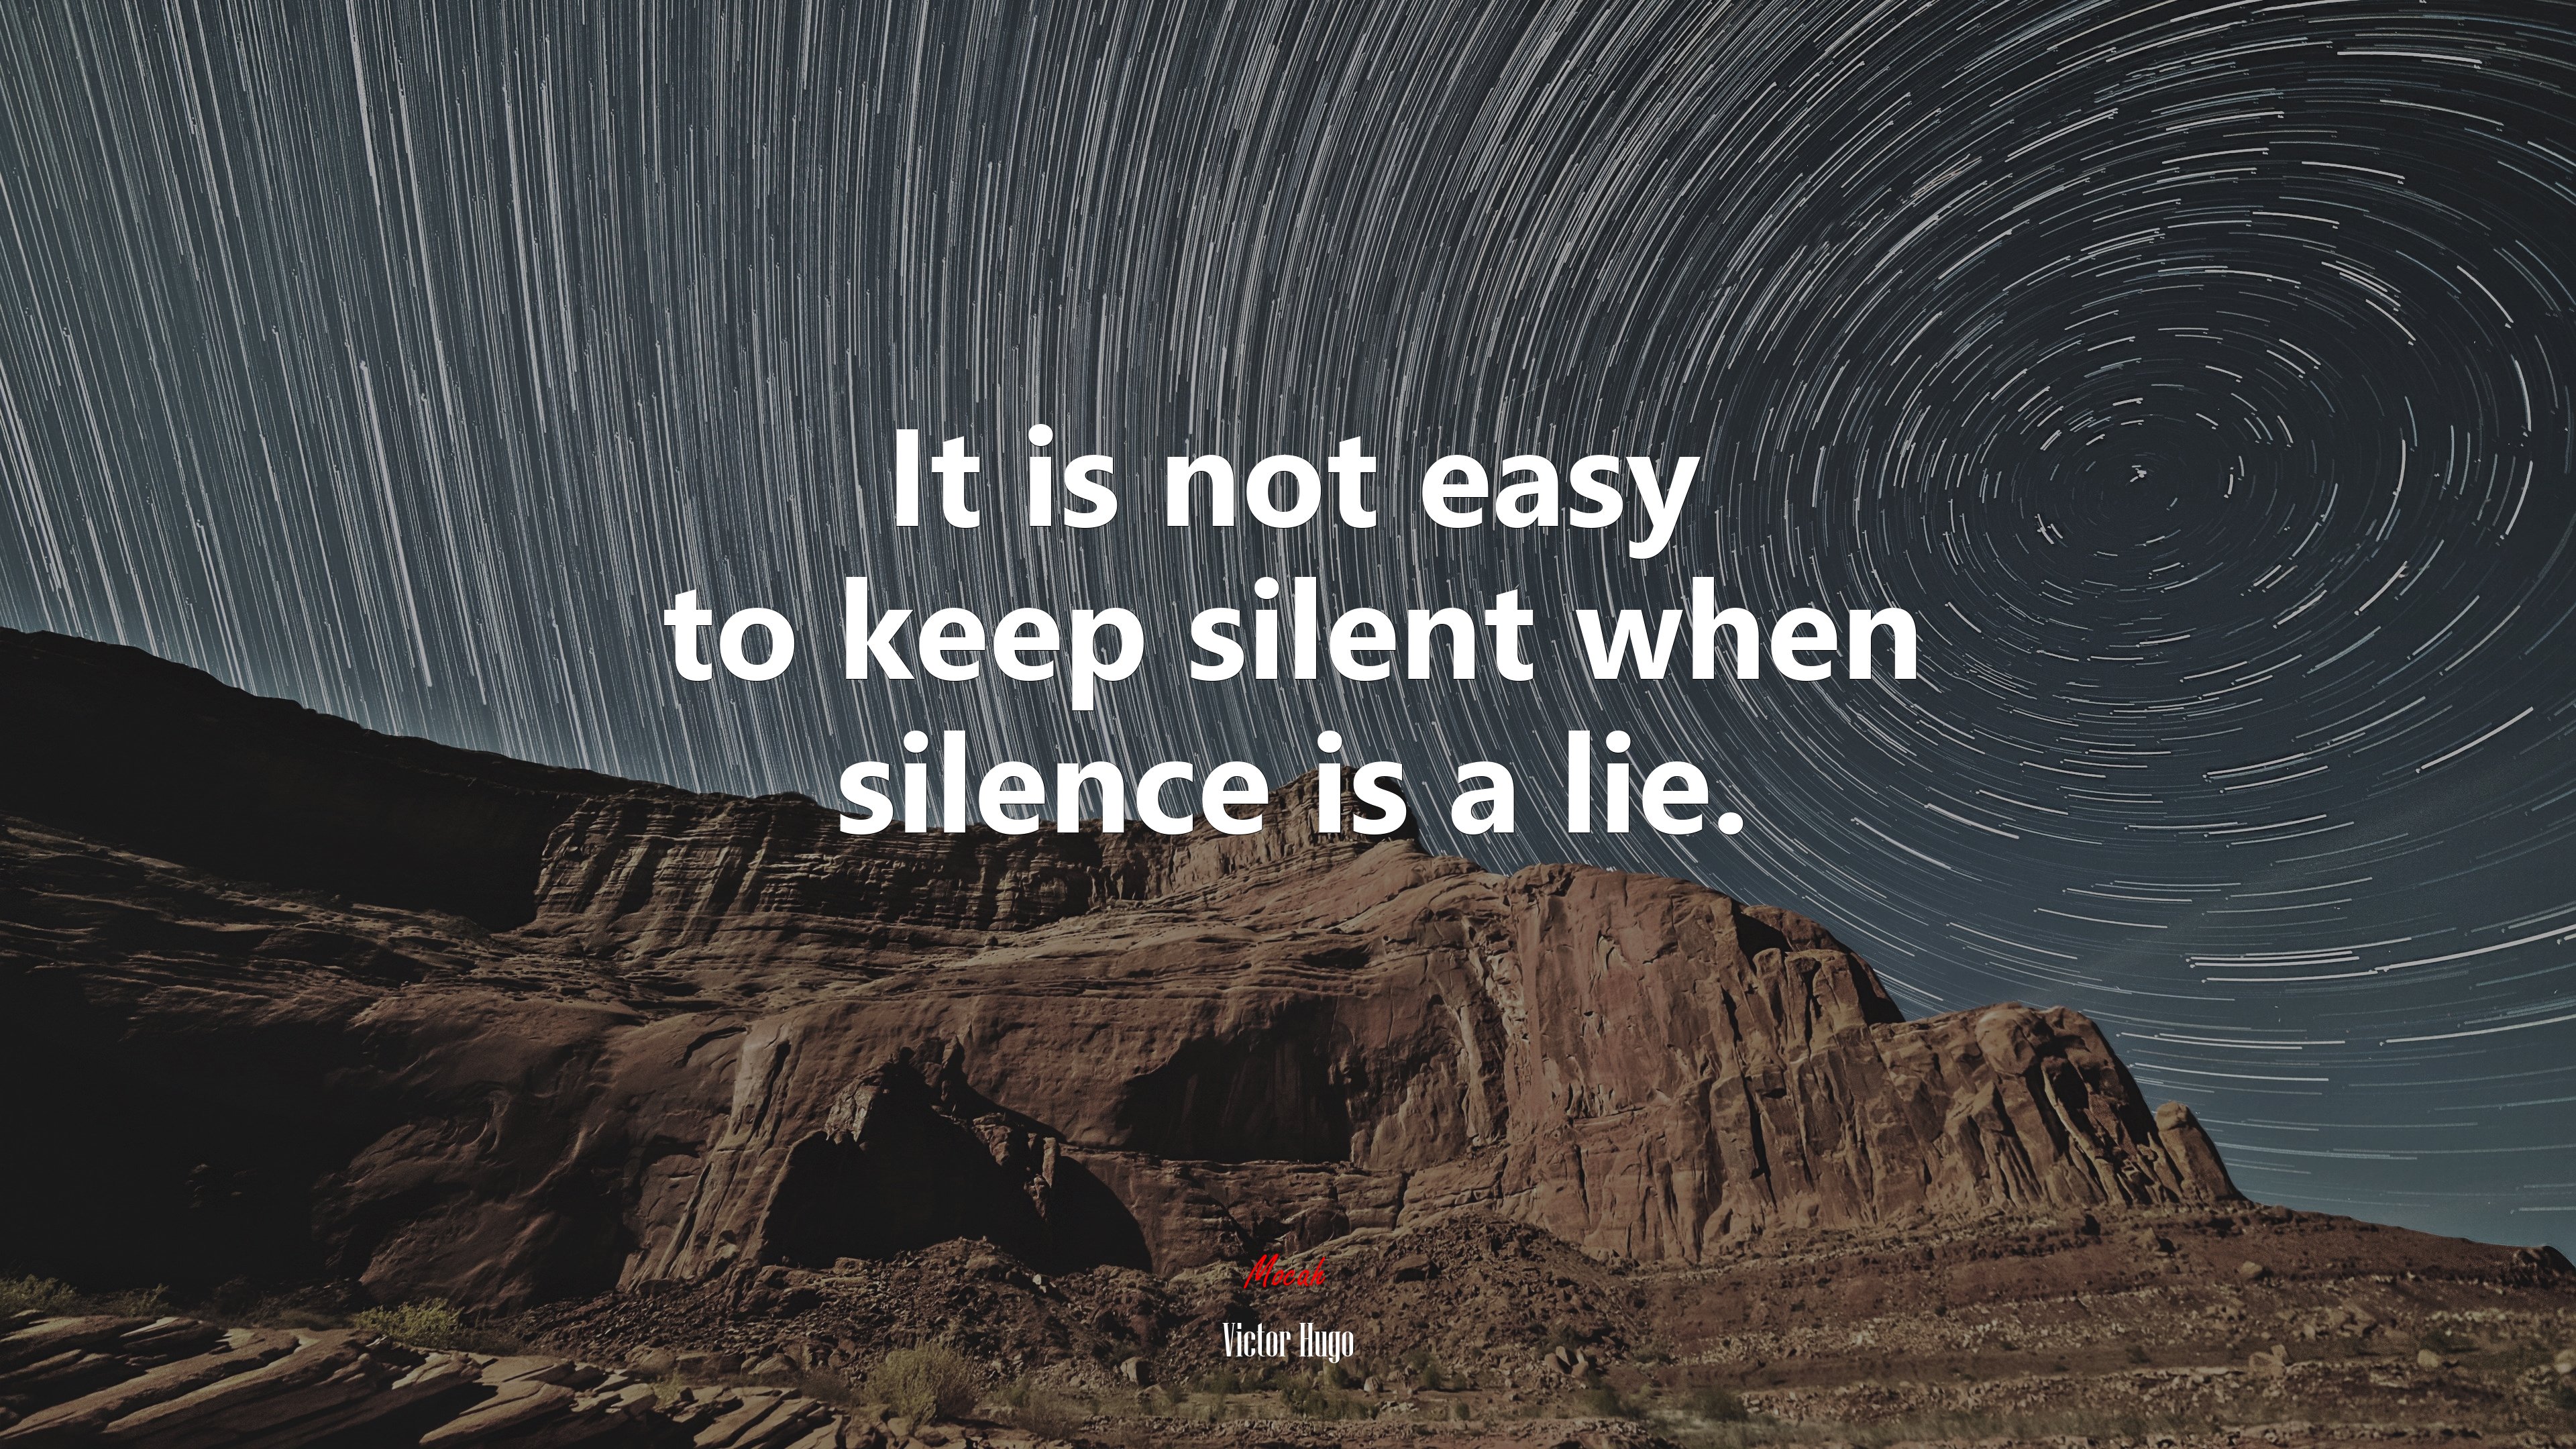 It is not easy to keep silent when silence is a lie. Victor Hugo quote Gallery HD Wallpaper